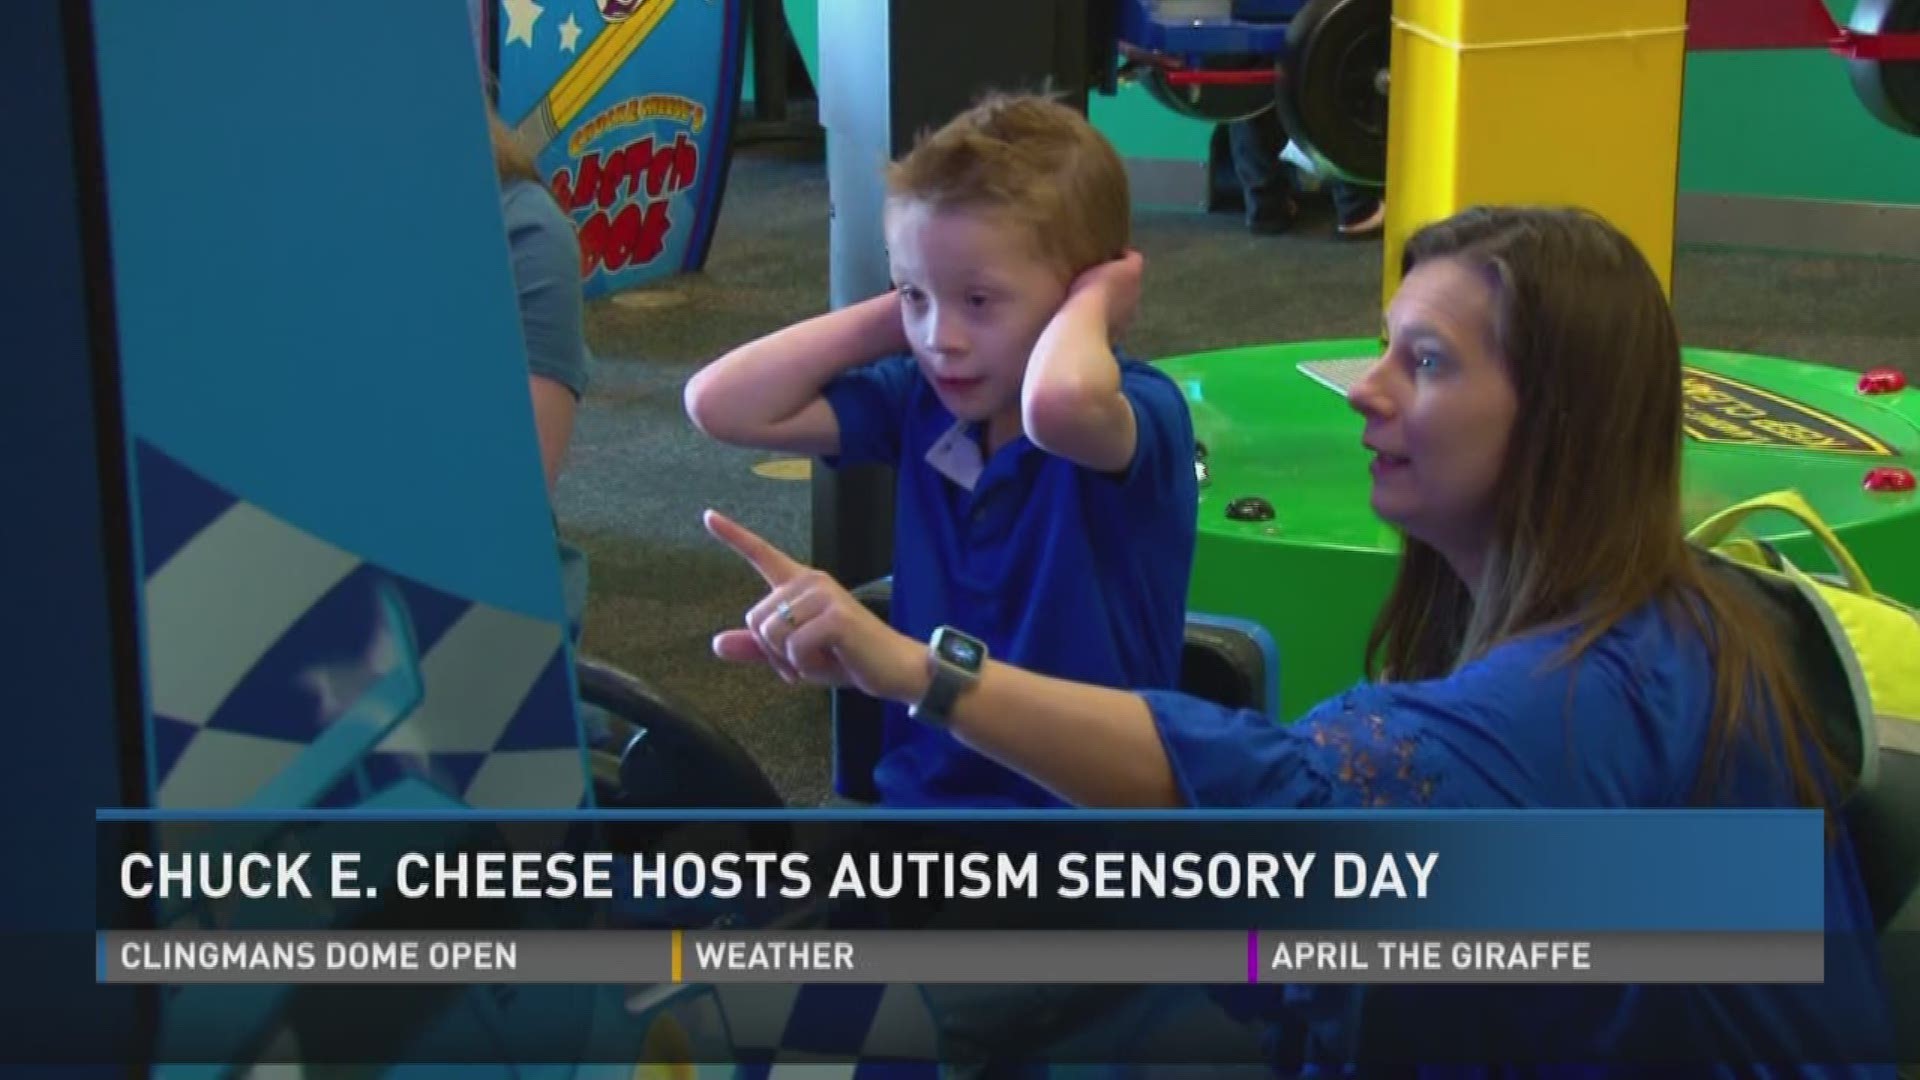 Chuck E Cheese kicked off world Autism awareness day this morning with a sensory-sensitive experience for its guests.